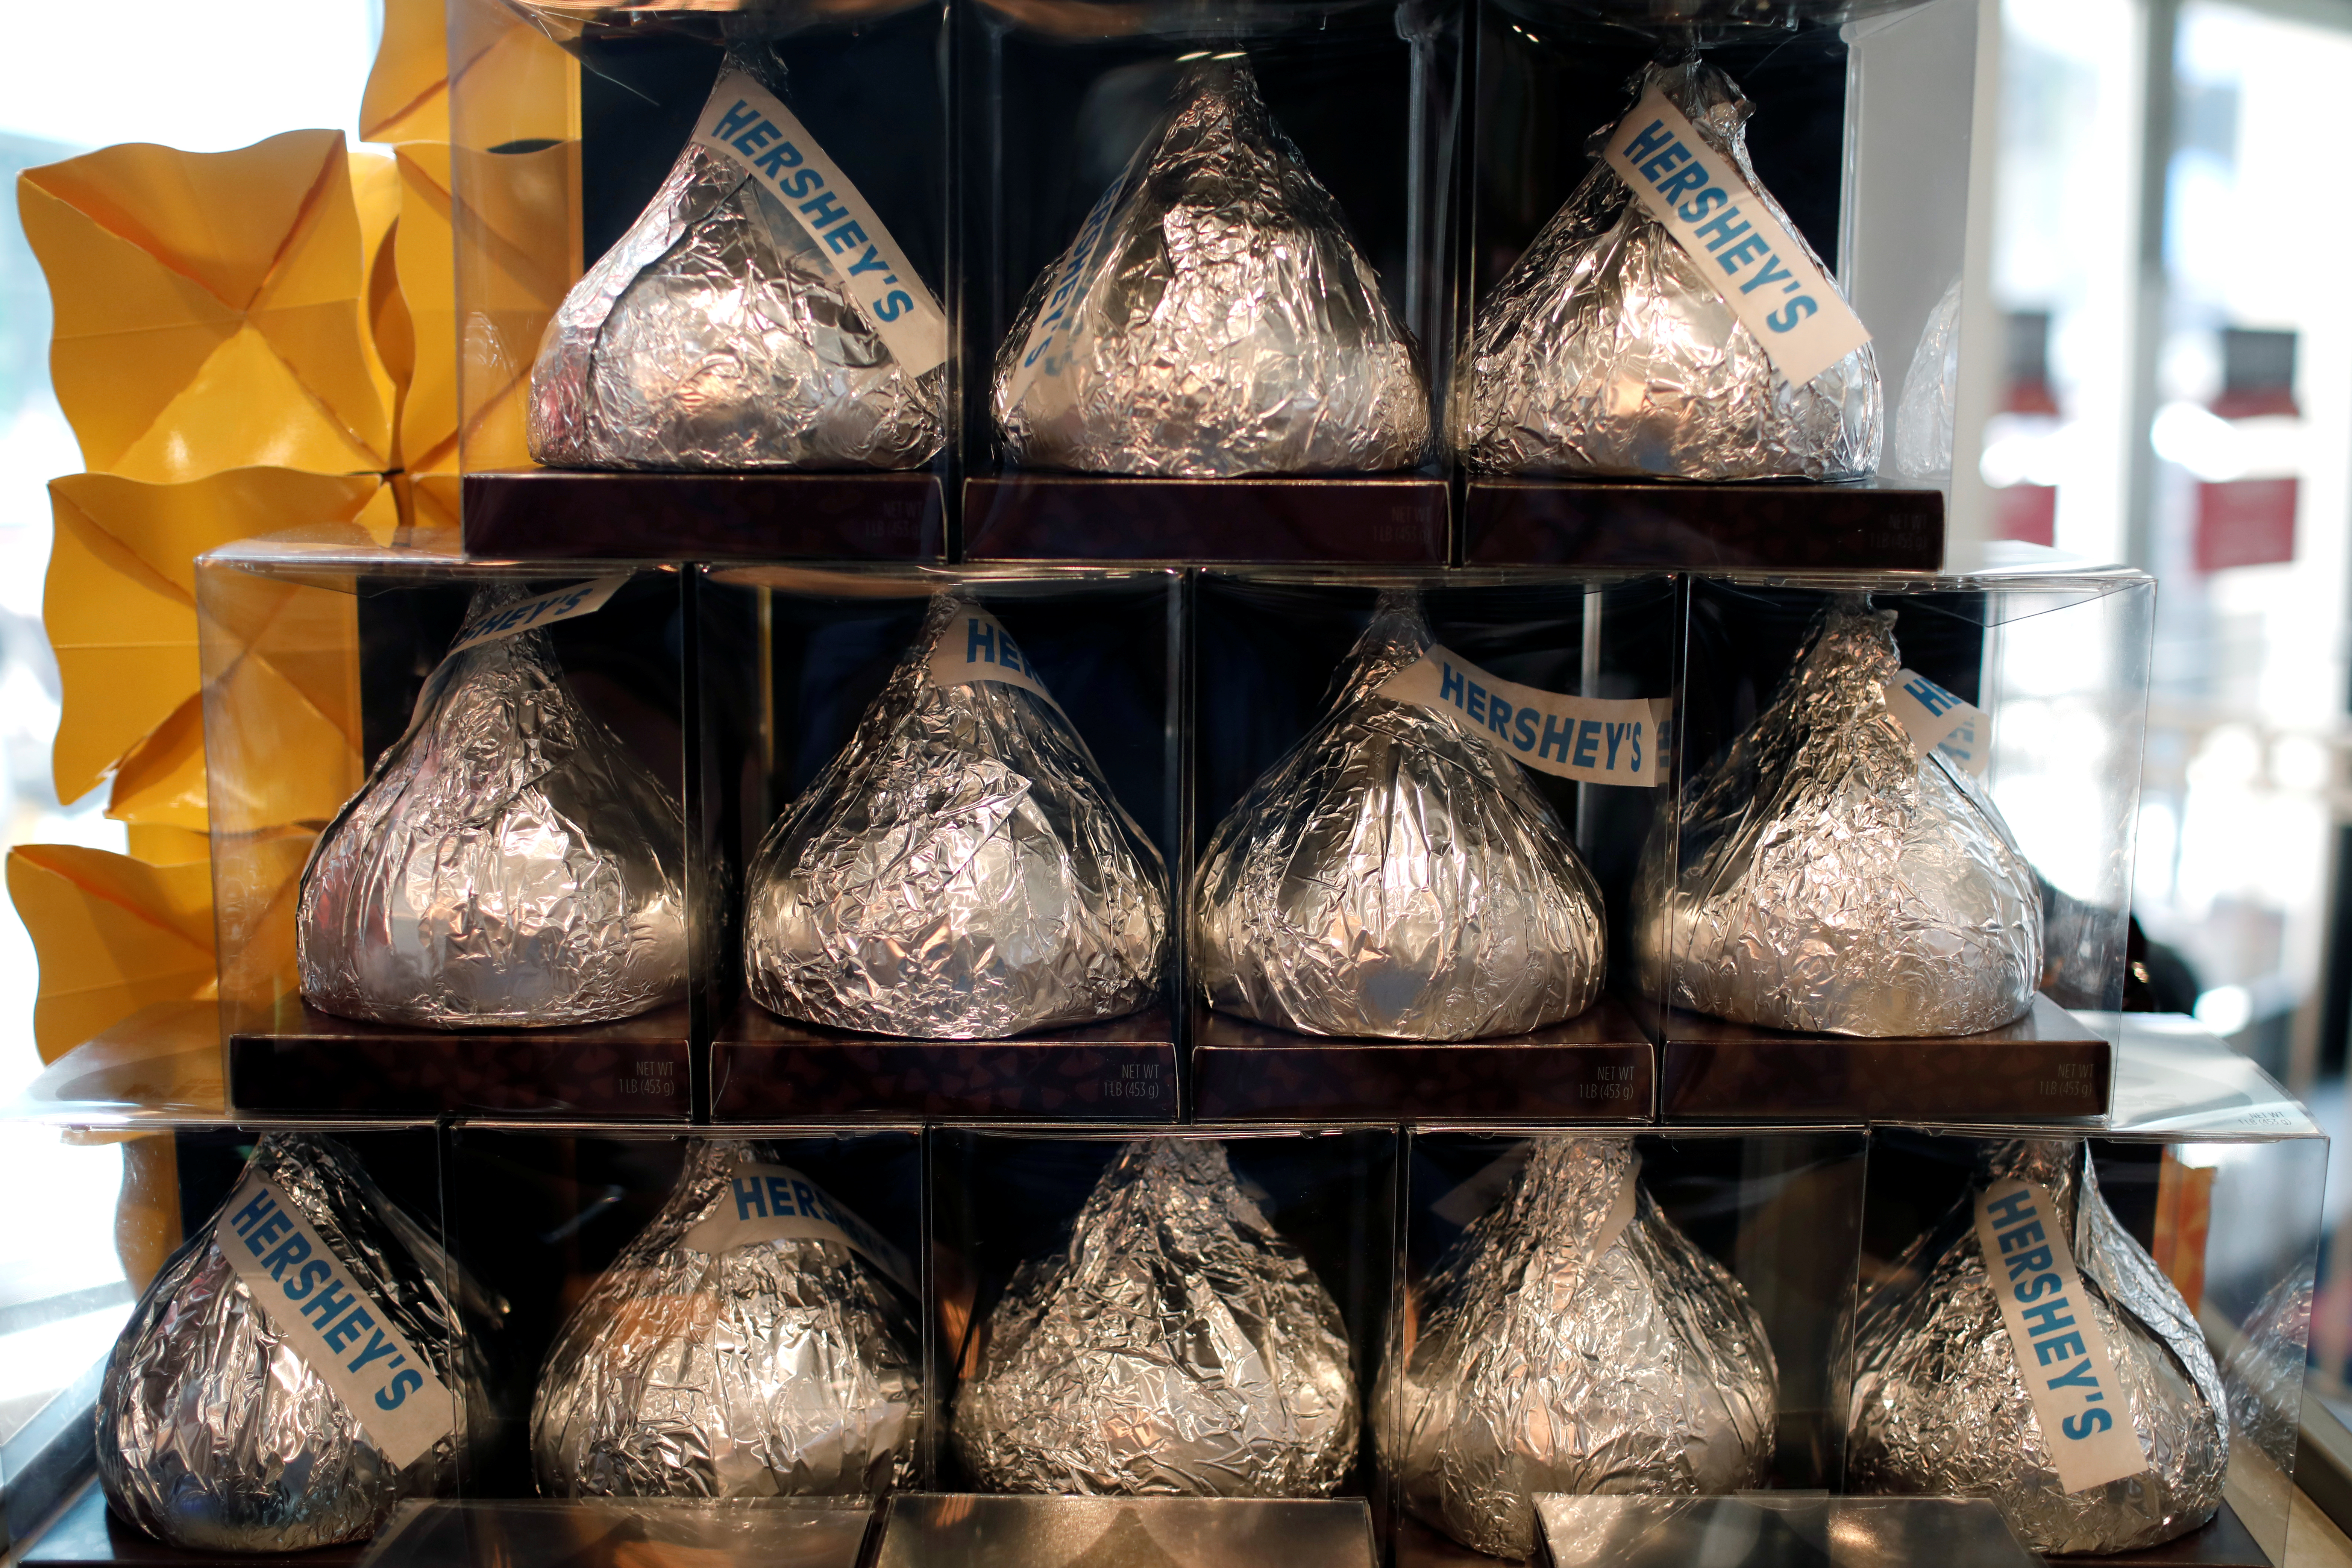 Giant Hershey's Kiss chocolates are seen on display in a shop in New York City..  REUTERS/Mike Segar